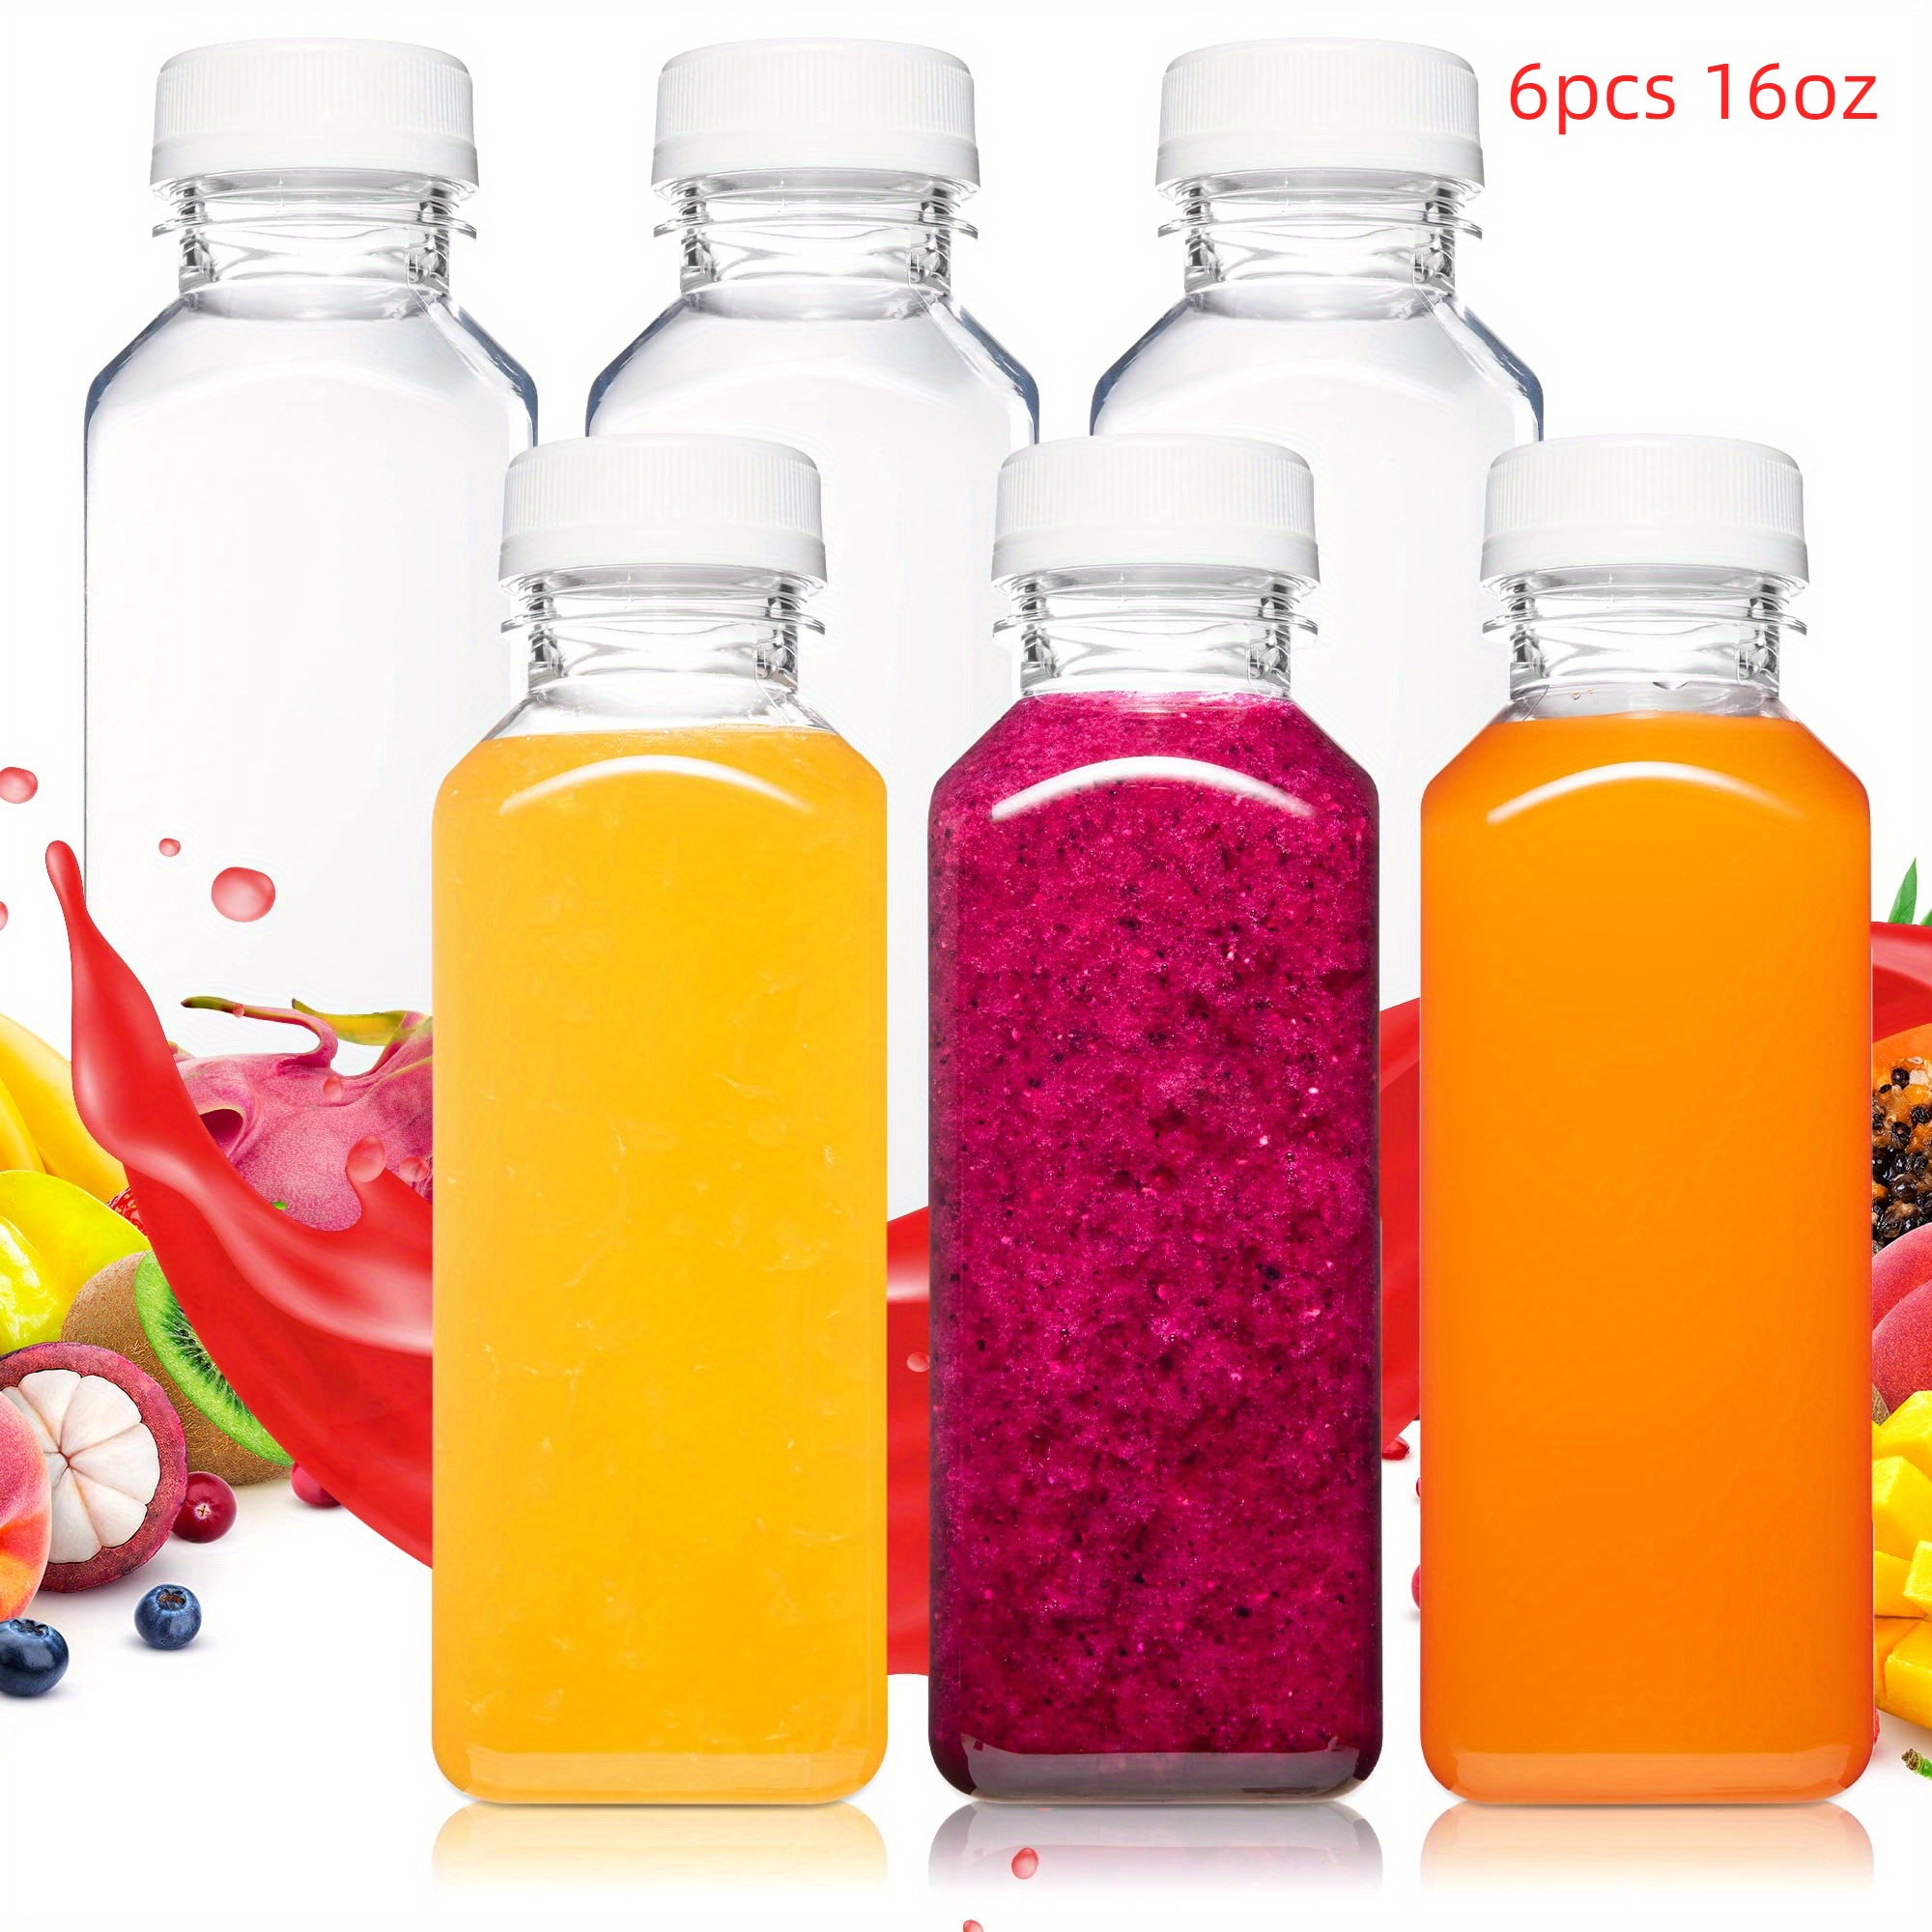 French Countryside 16 Ounce Juice Bottles, 10 Square Juicing Bottles - with Tamper-Evident Caps, Reusable, Clear Glass Juicing Storage Bottles, for